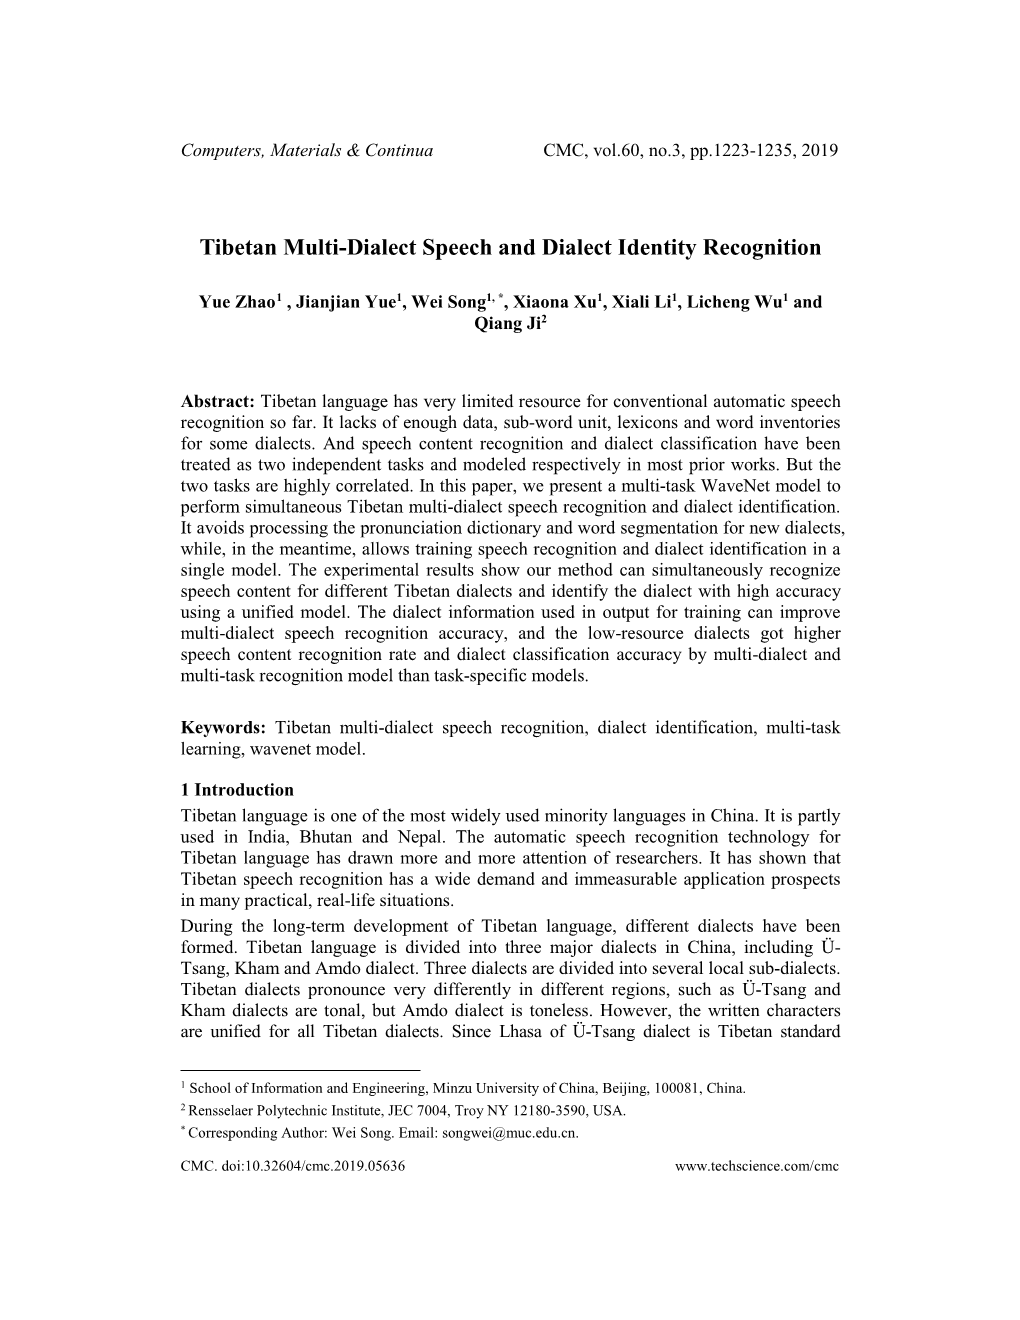 Tibetan Multi-Dialect Speech and Dialect Identity Recognition